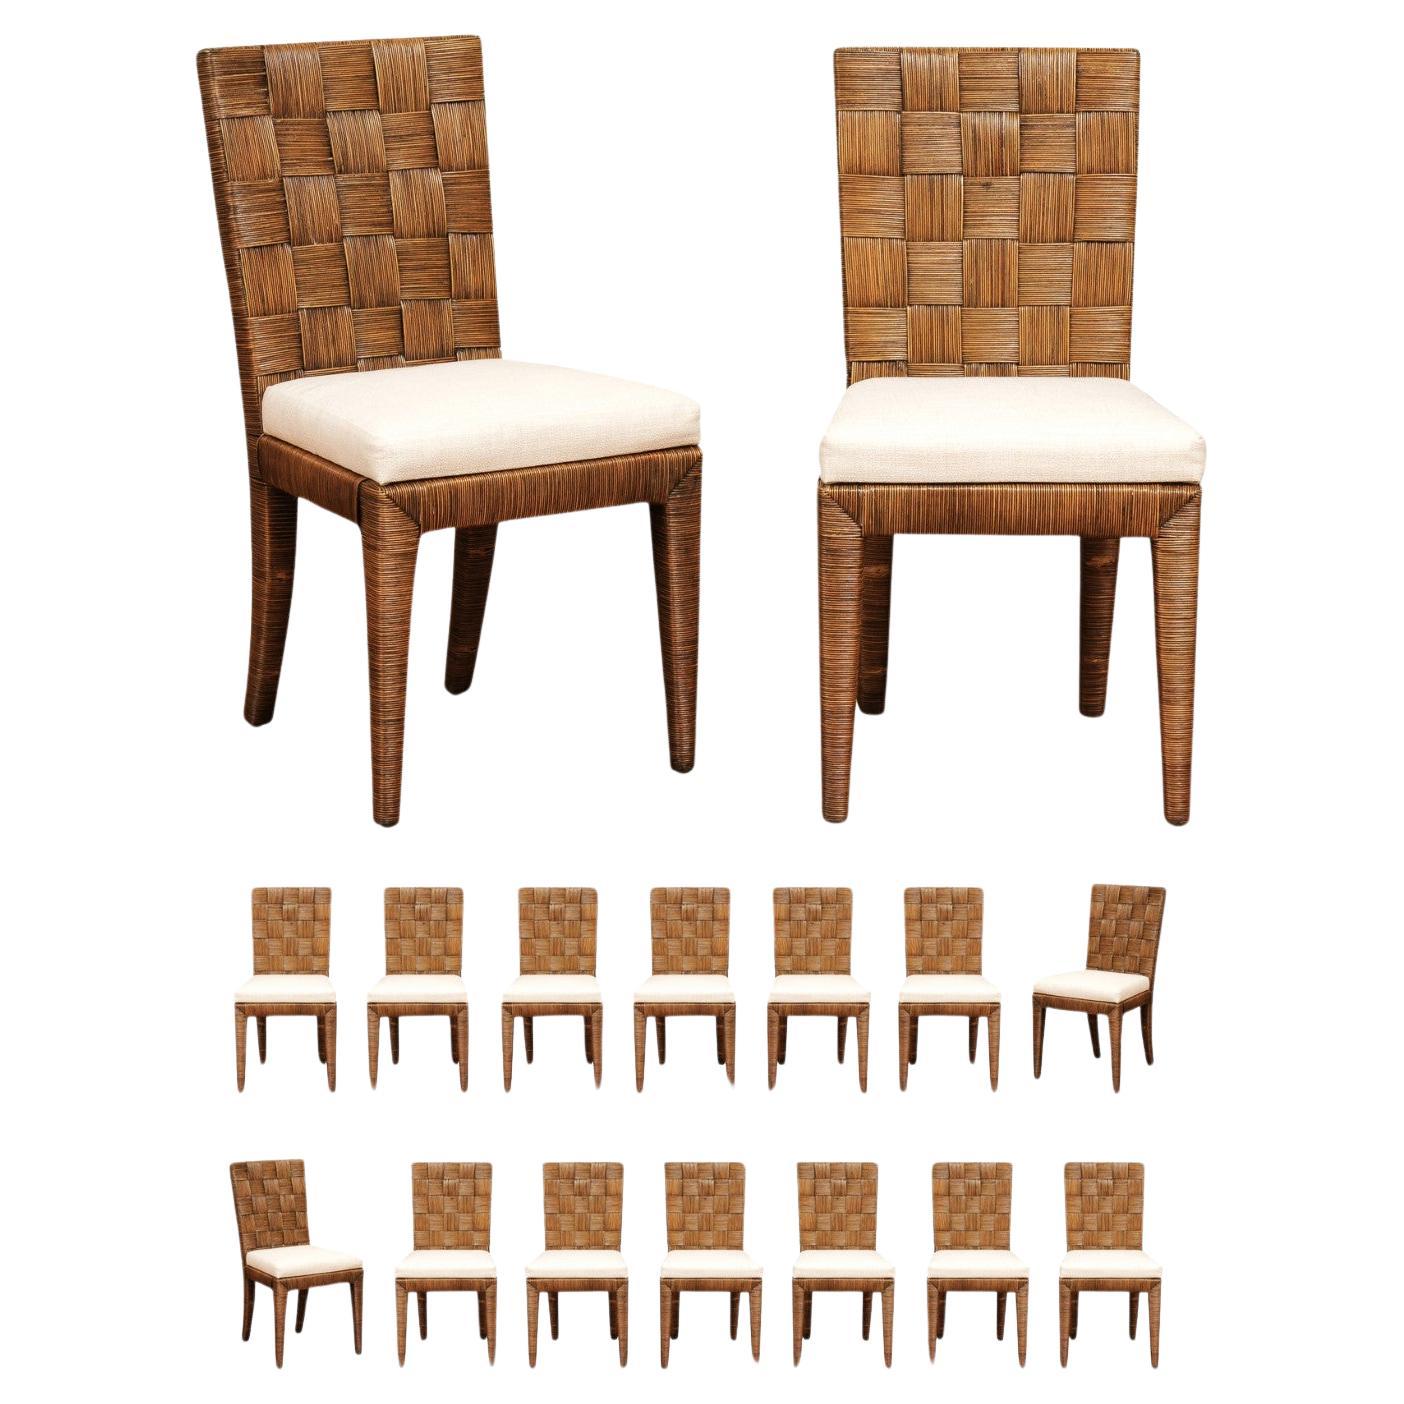 Stellar Restored Set of 16 Block Island Cane Chairs by John Hutton for Donghia